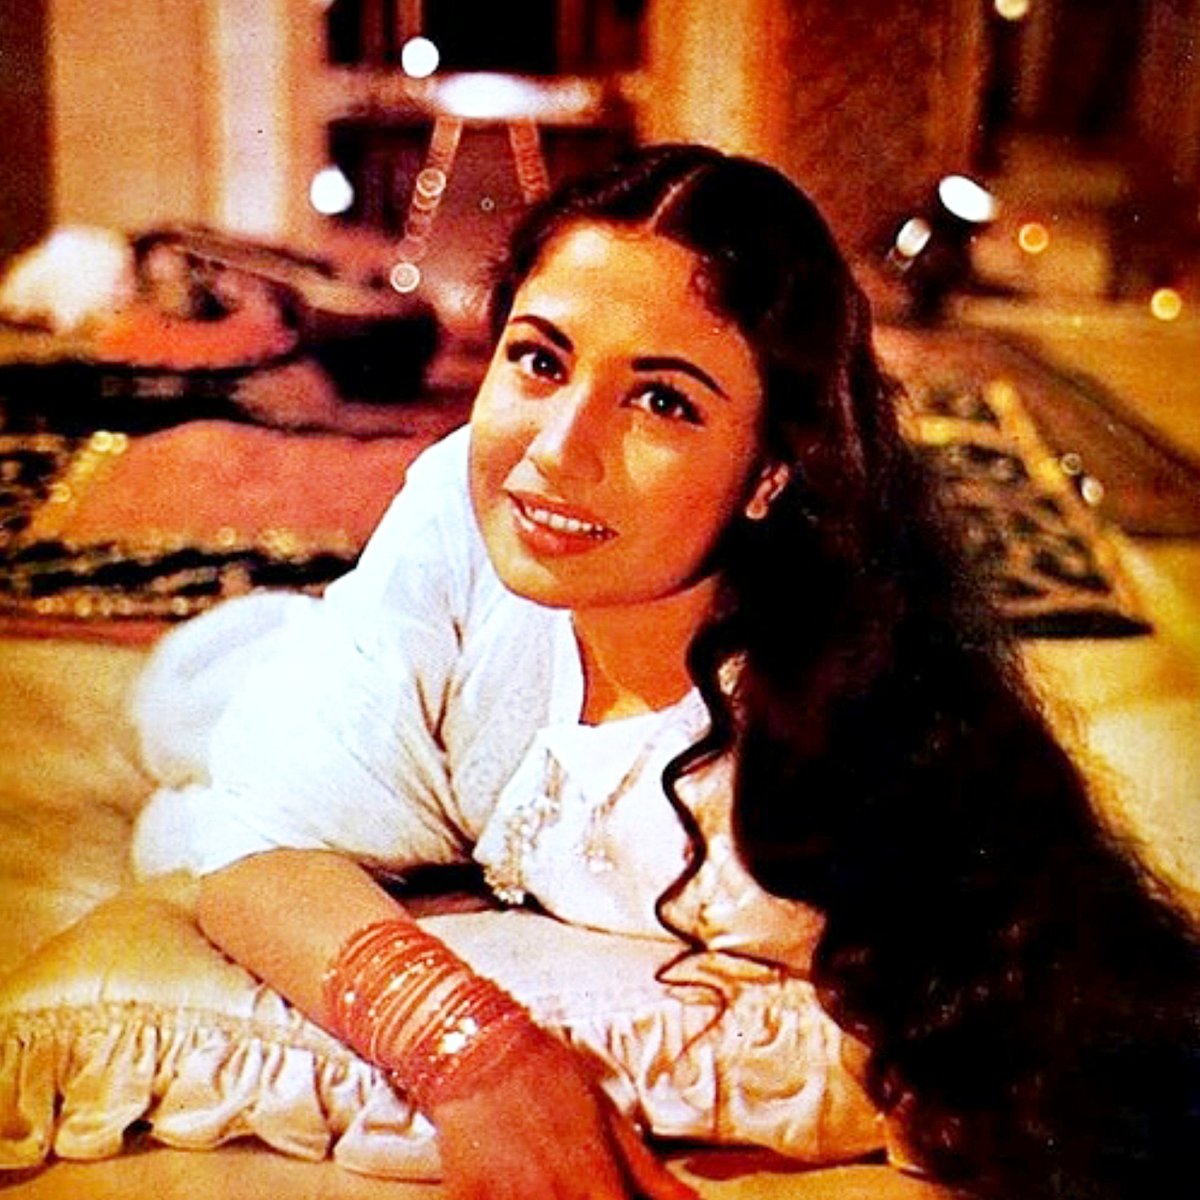 Nigahen Is Qadar Qatil ki Uff Uff,
Adaen Is Qadar Pyari Ki Tauba
-#ArzooLakhnavi

Her long hair, the sparkle in her eyes, that lovely smile, and then she is dressed in her favourite white.

Looking right at me with those beautiful eyes ,how can i turn my gaze away😍.
#MeenaKumari